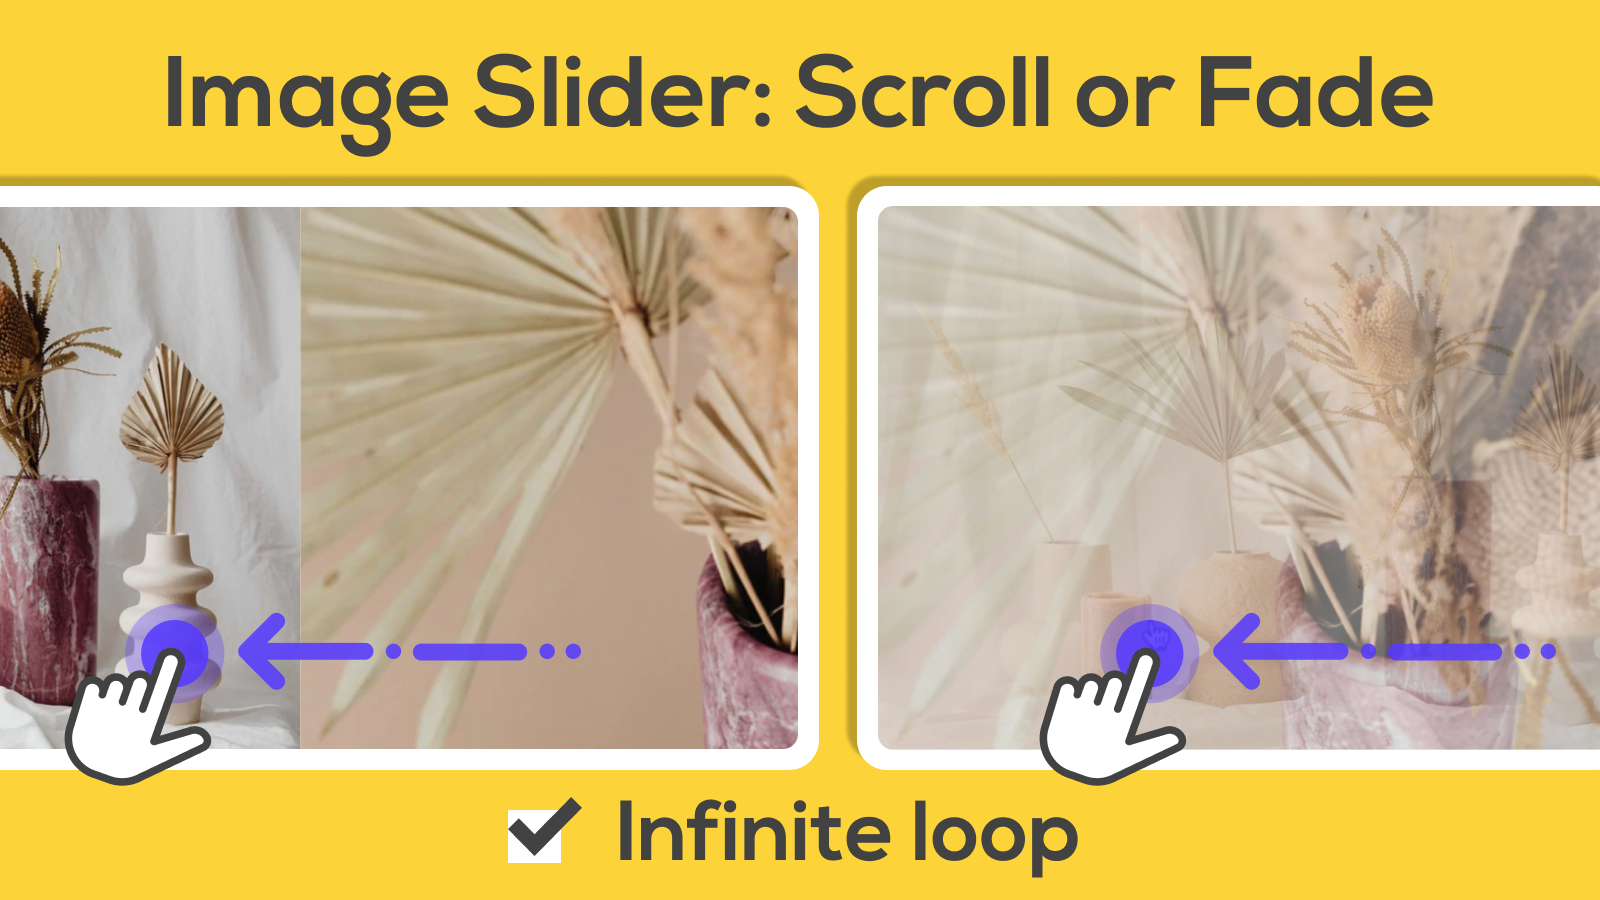 Image Slider: Scroll or Fade (Infinite Loop Available)